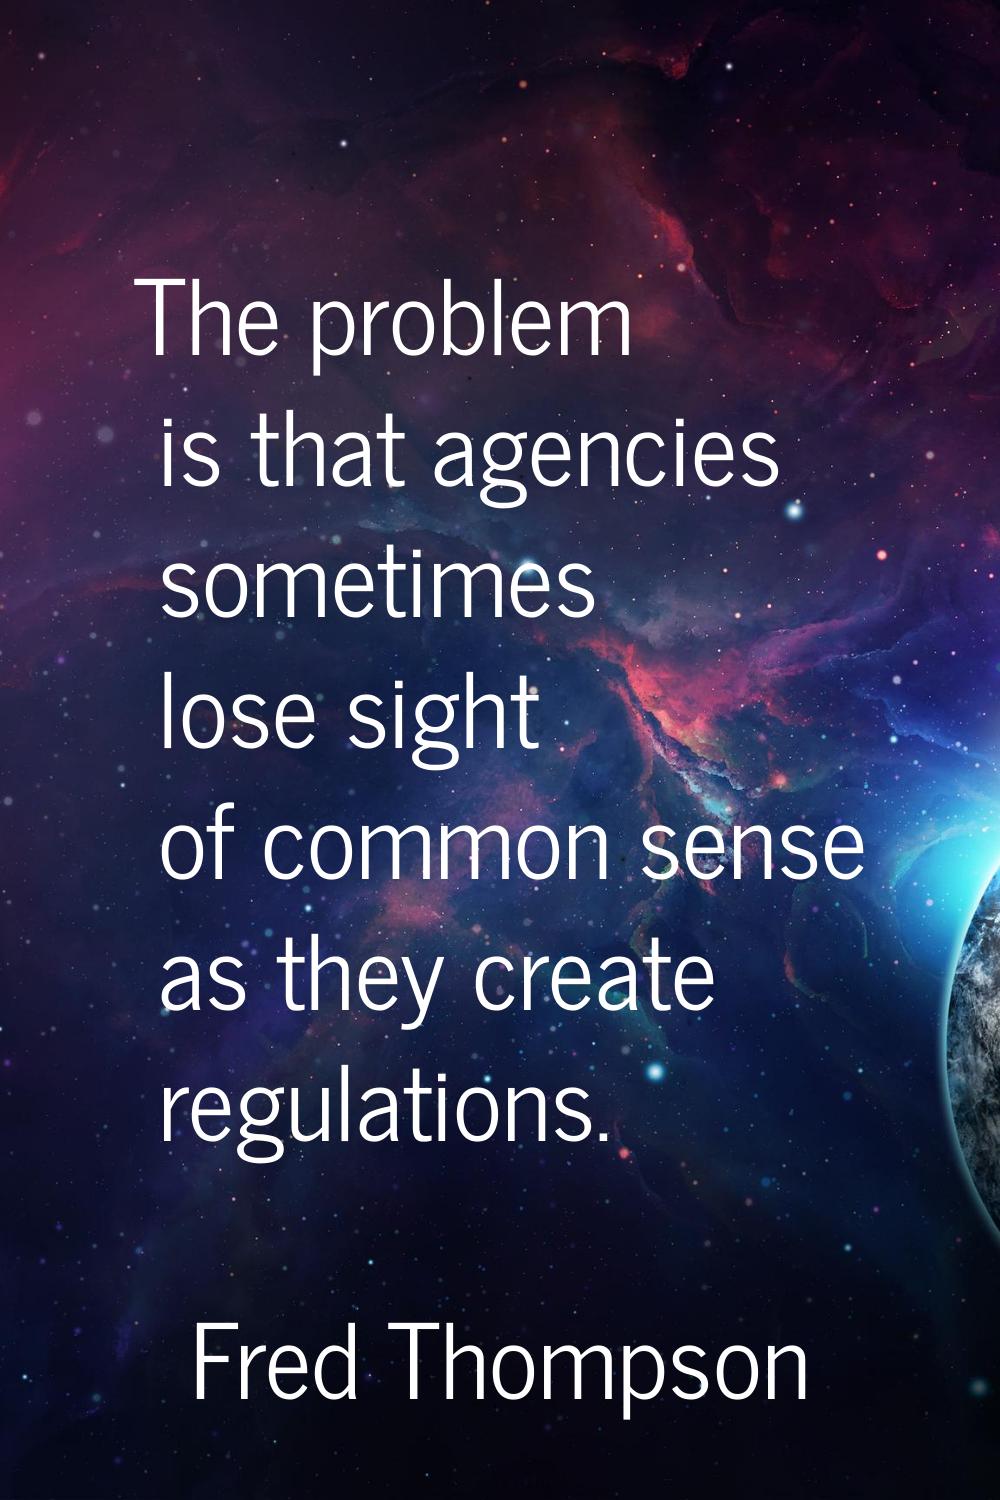 The problem is that agencies sometimes lose sight of common sense as they create regulations.